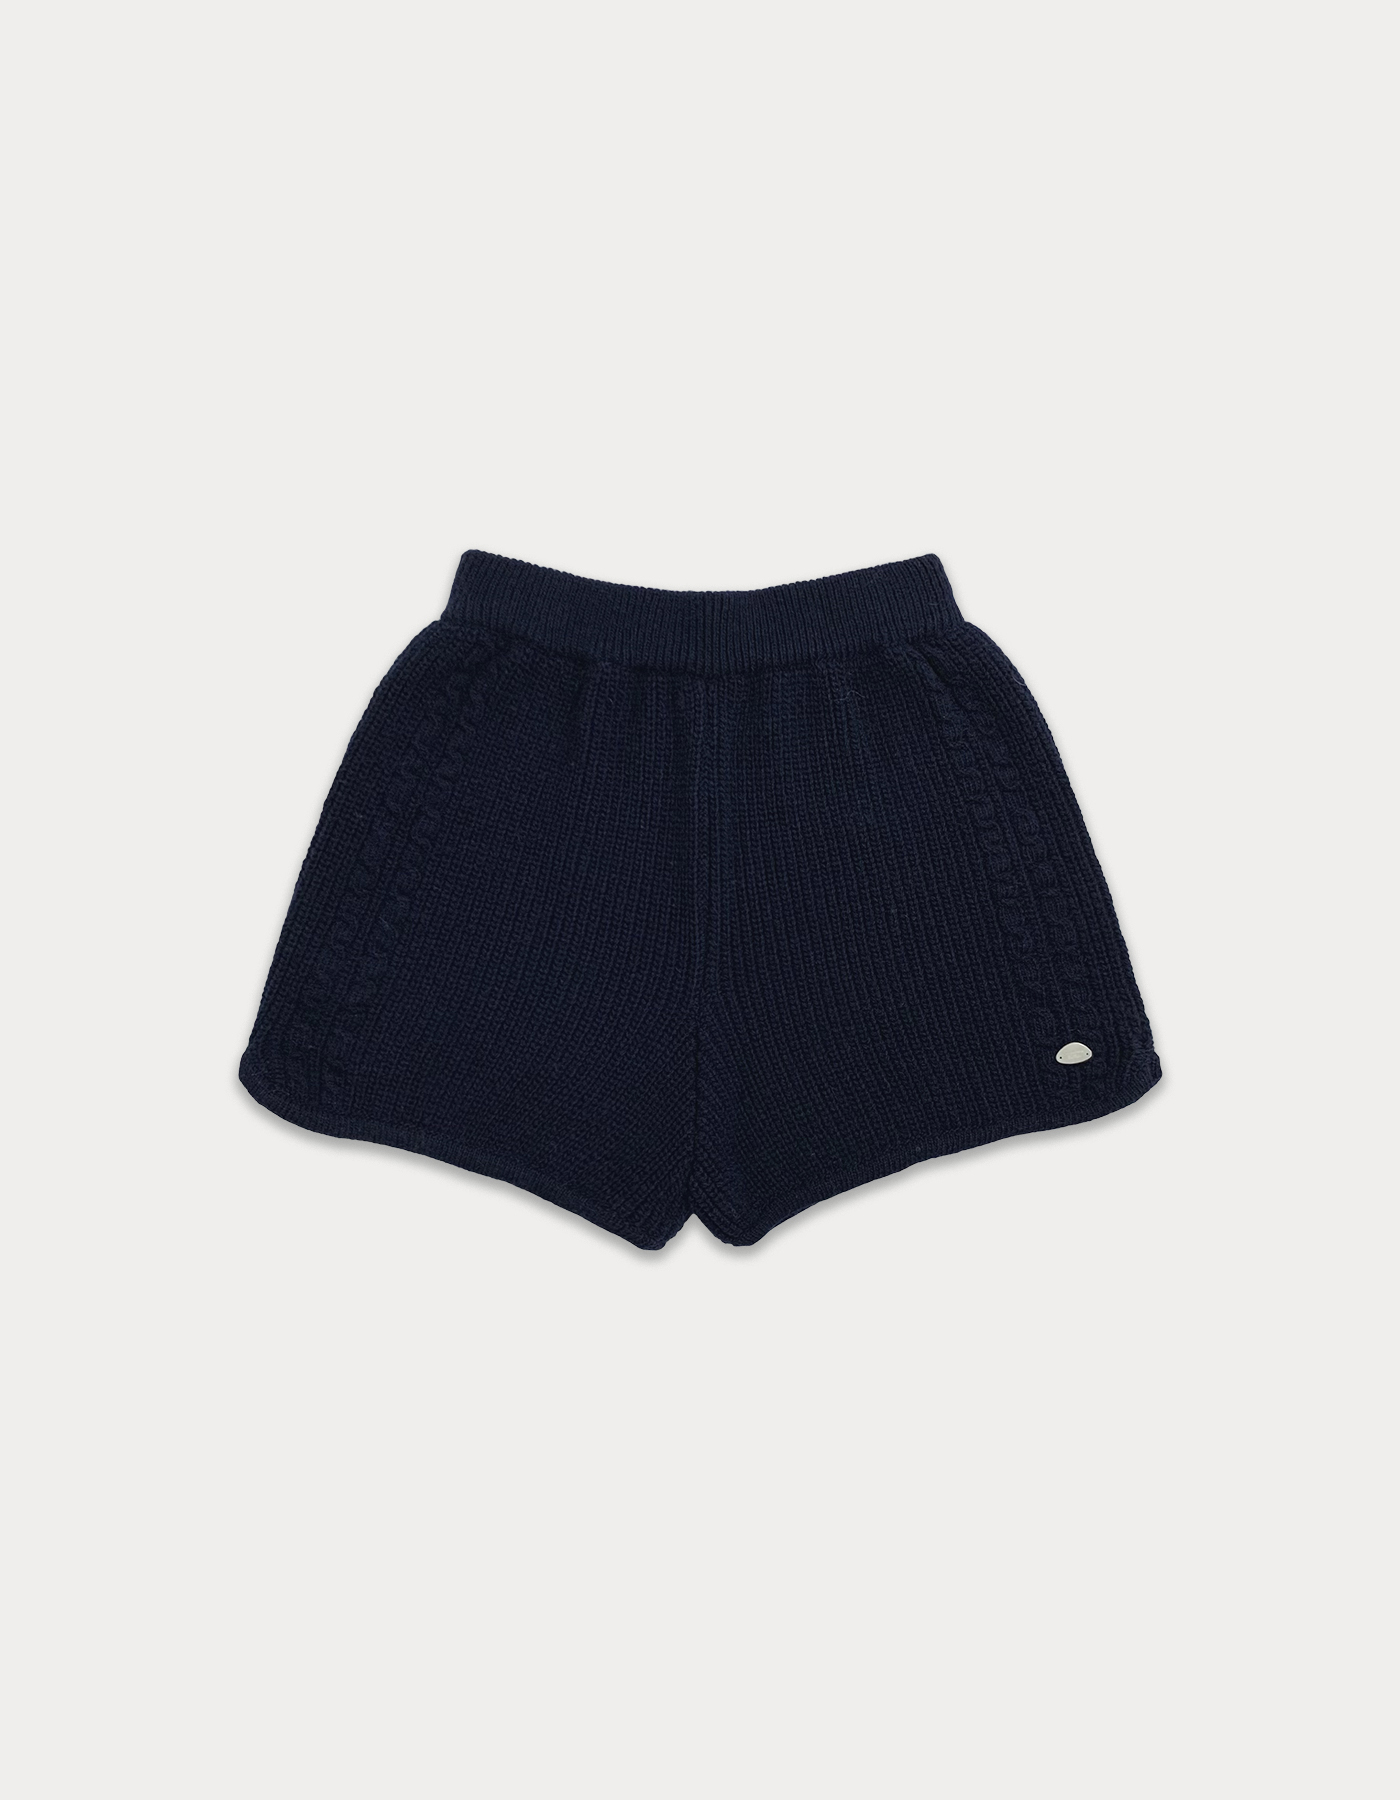 Double cable knit pants - navy